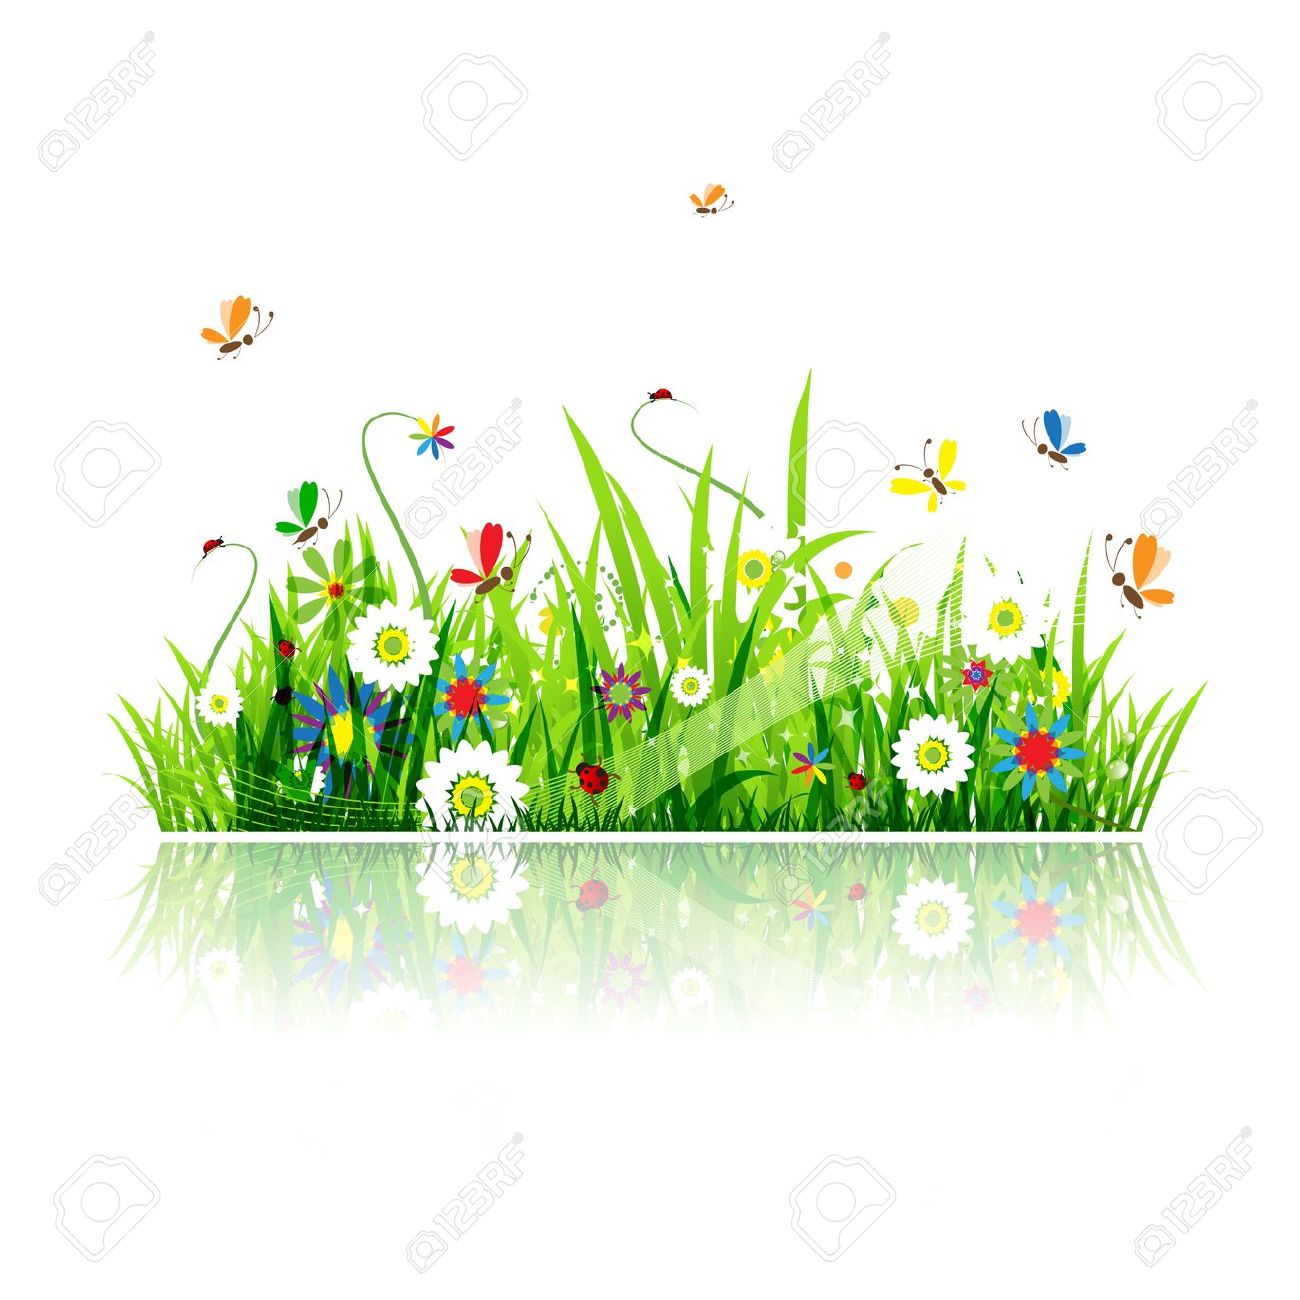 flower meadow clipart - photo #32